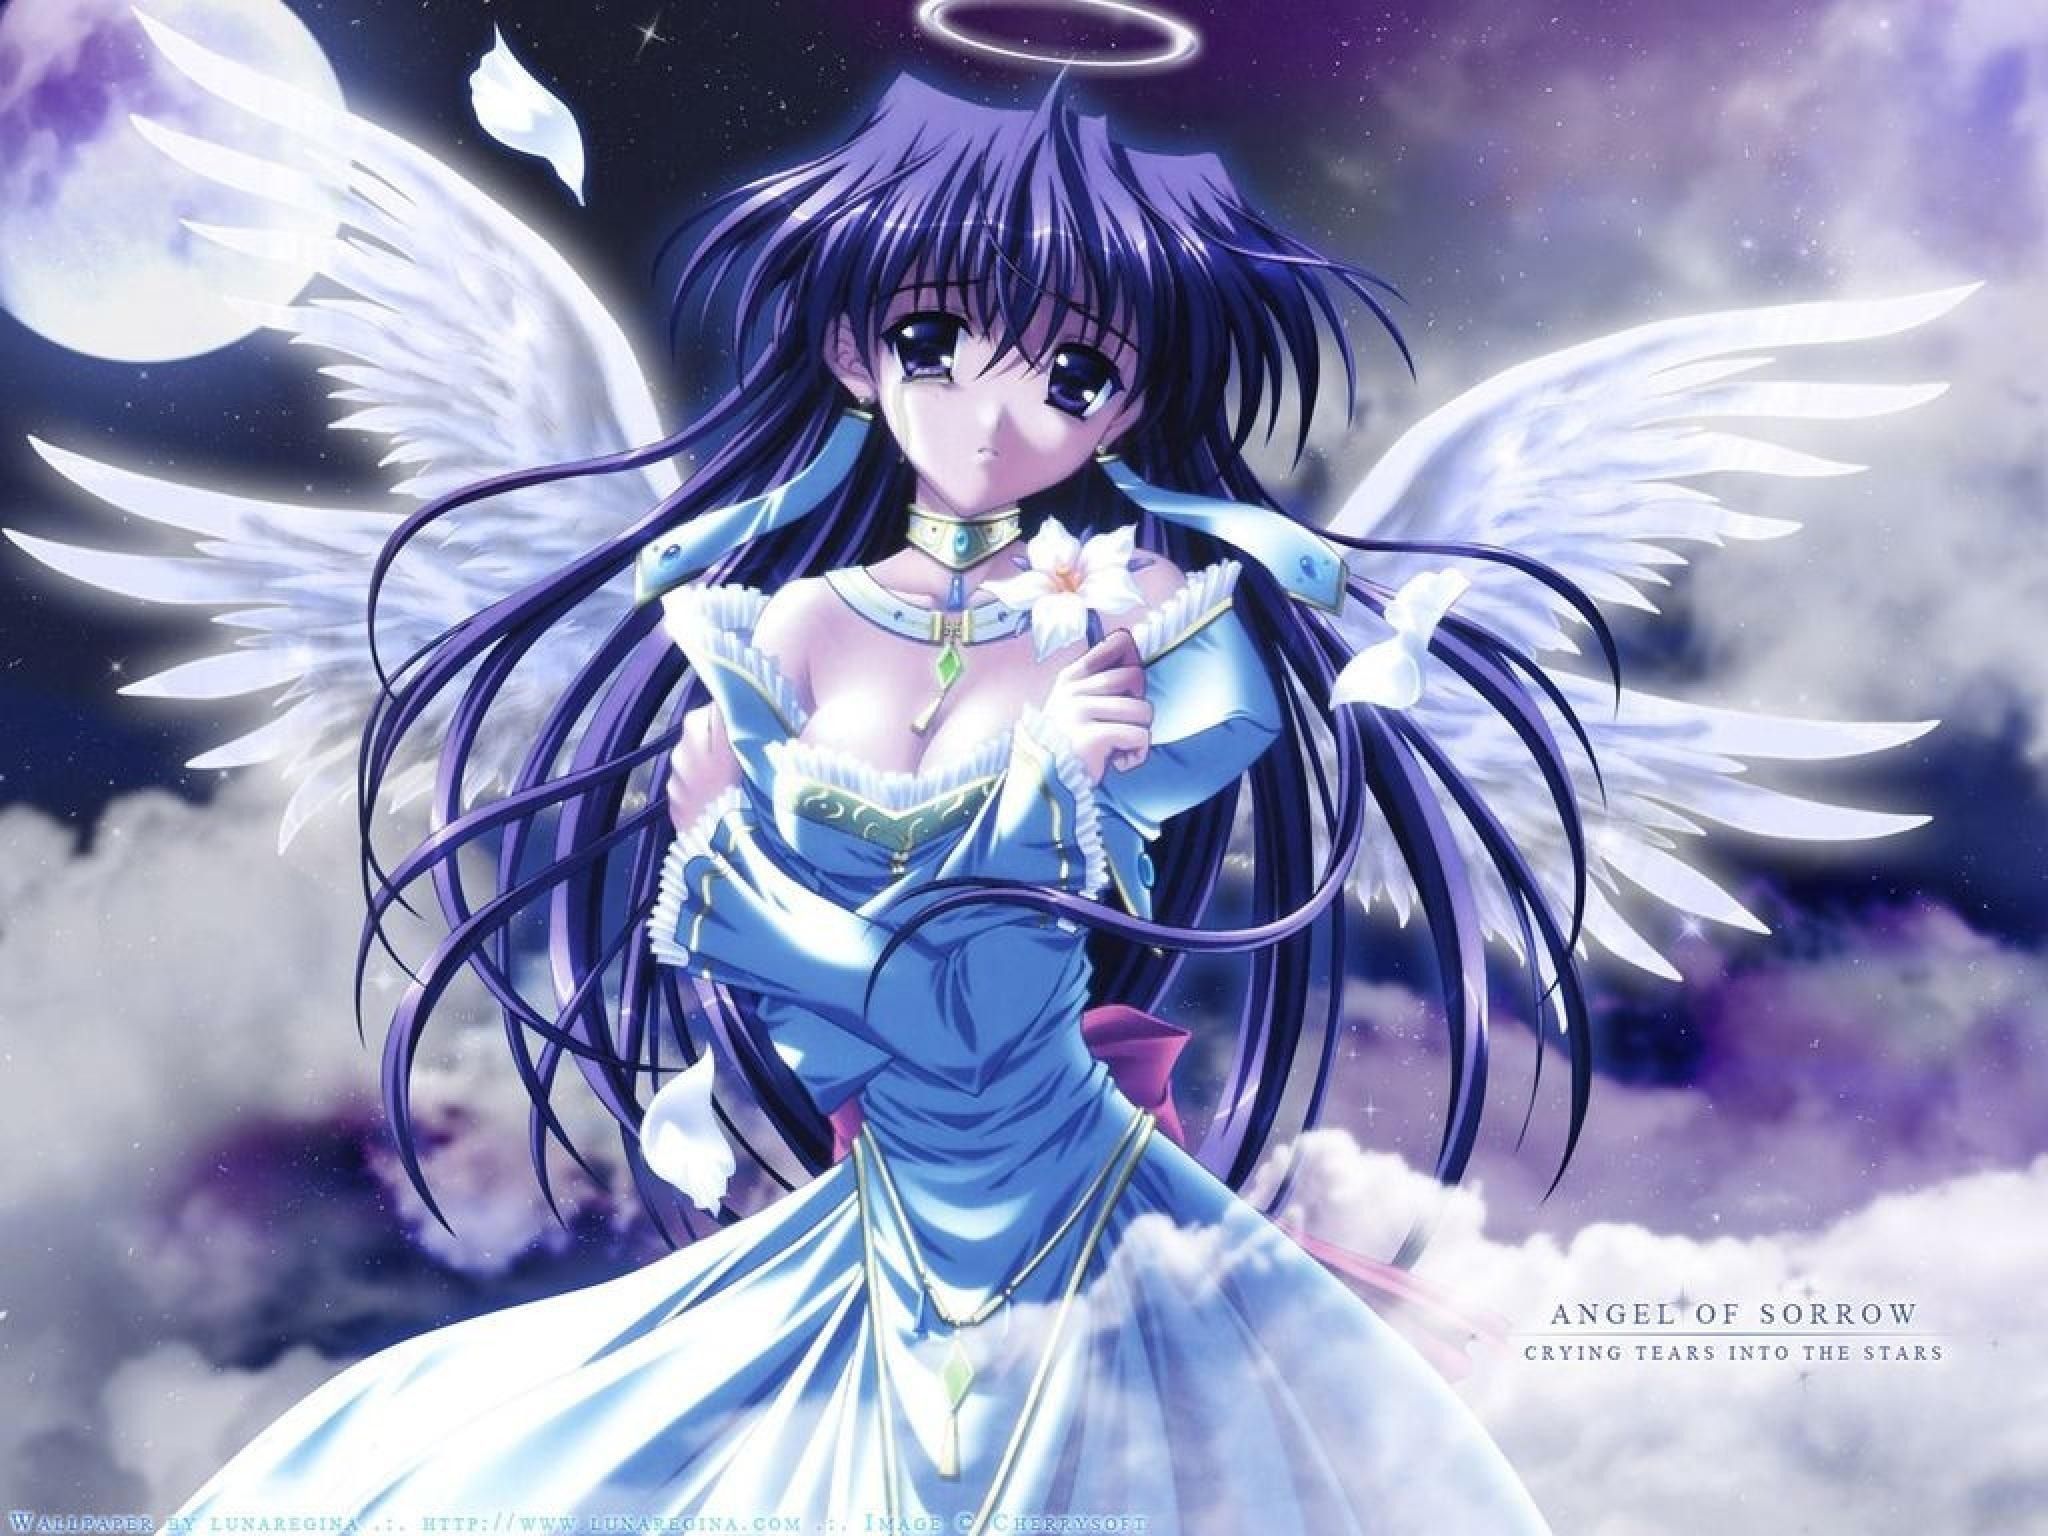 Anime girl with wings and a dress - Animecore